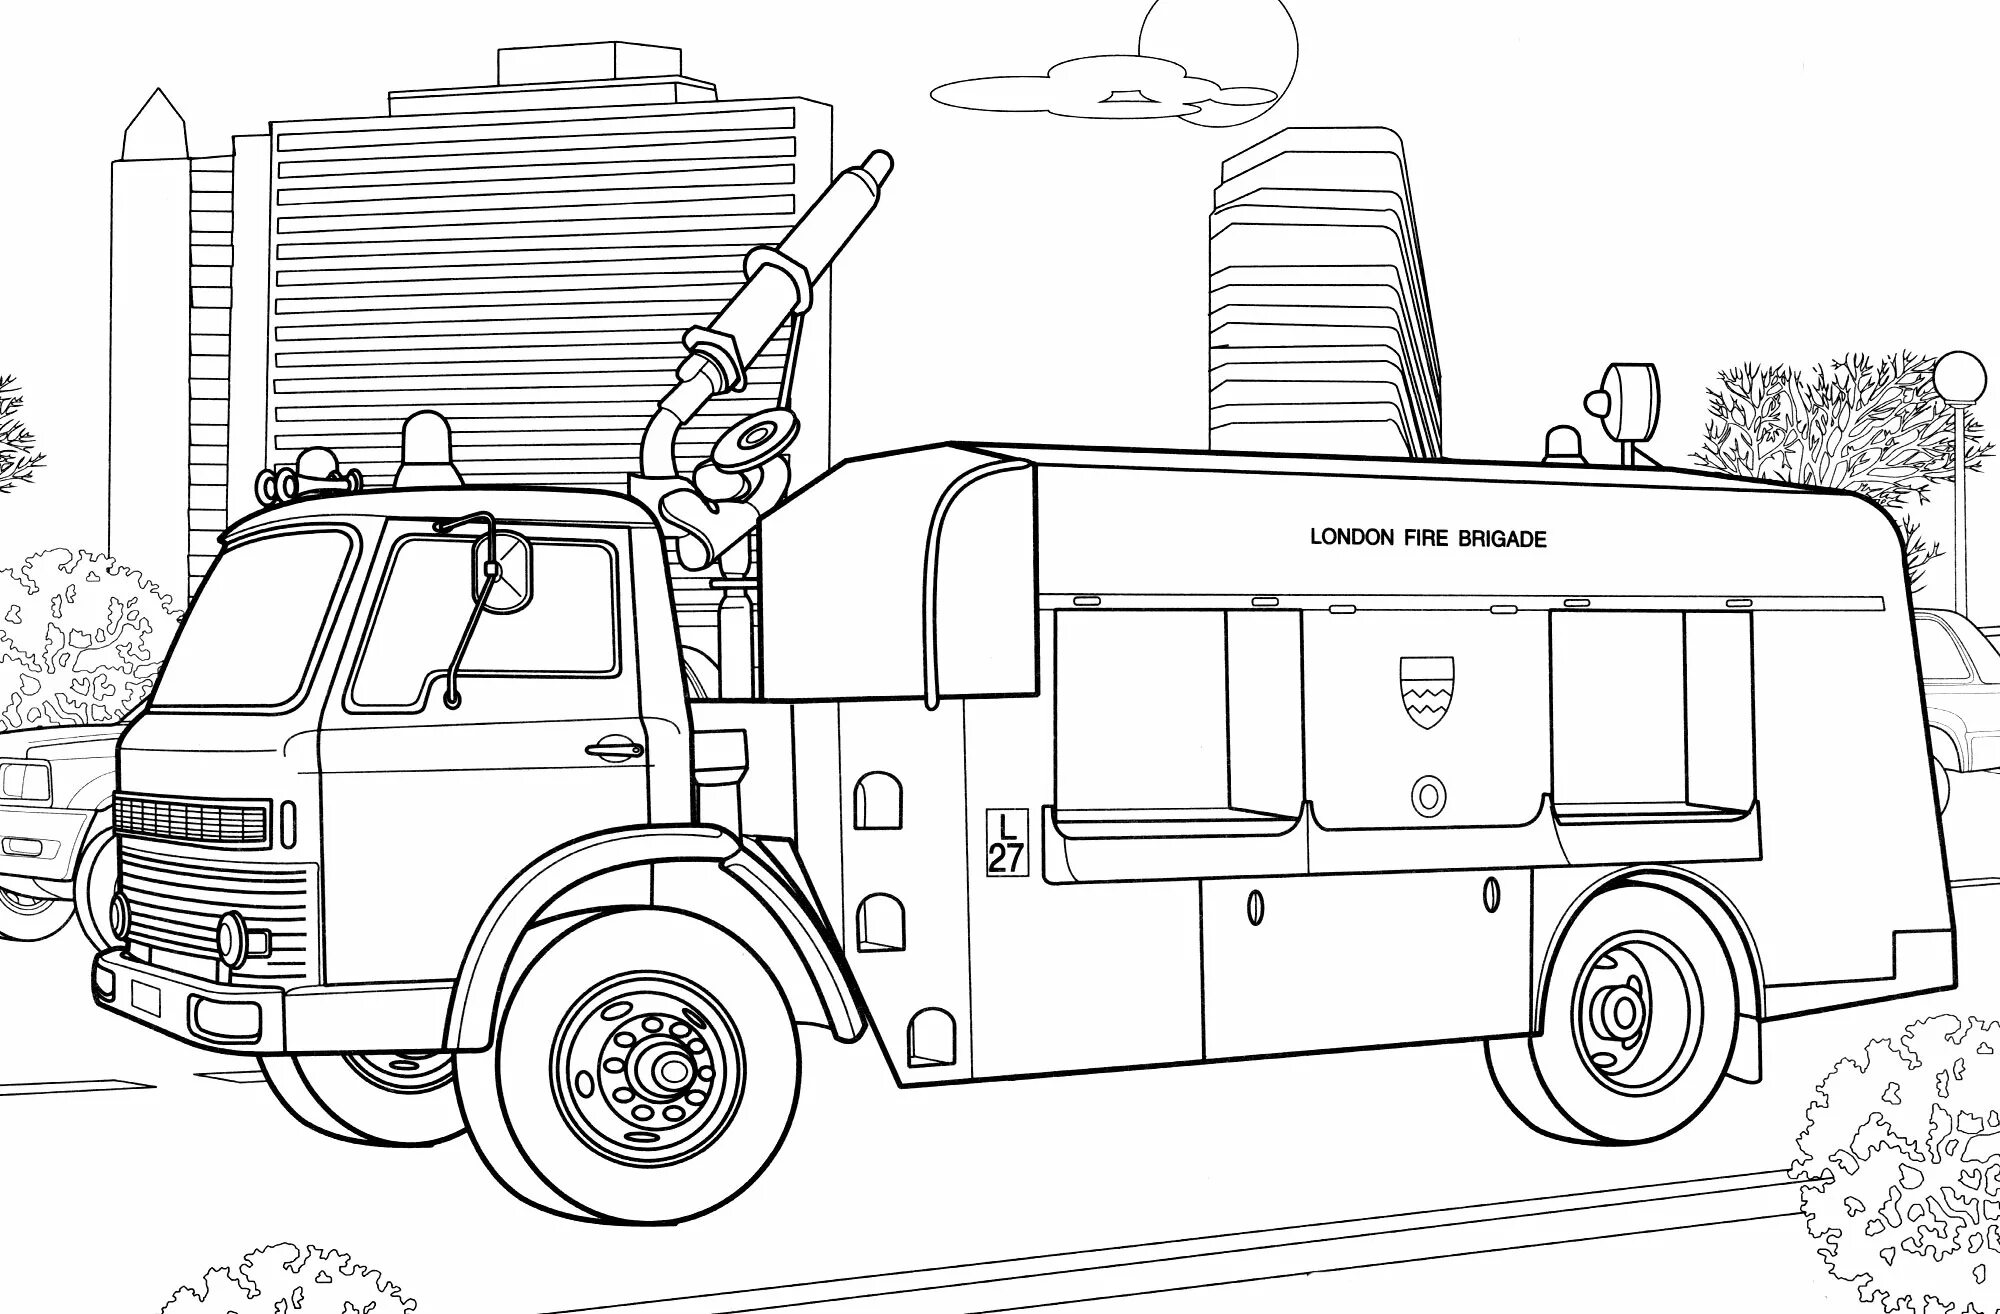 Charming firefighting equipment coloring page